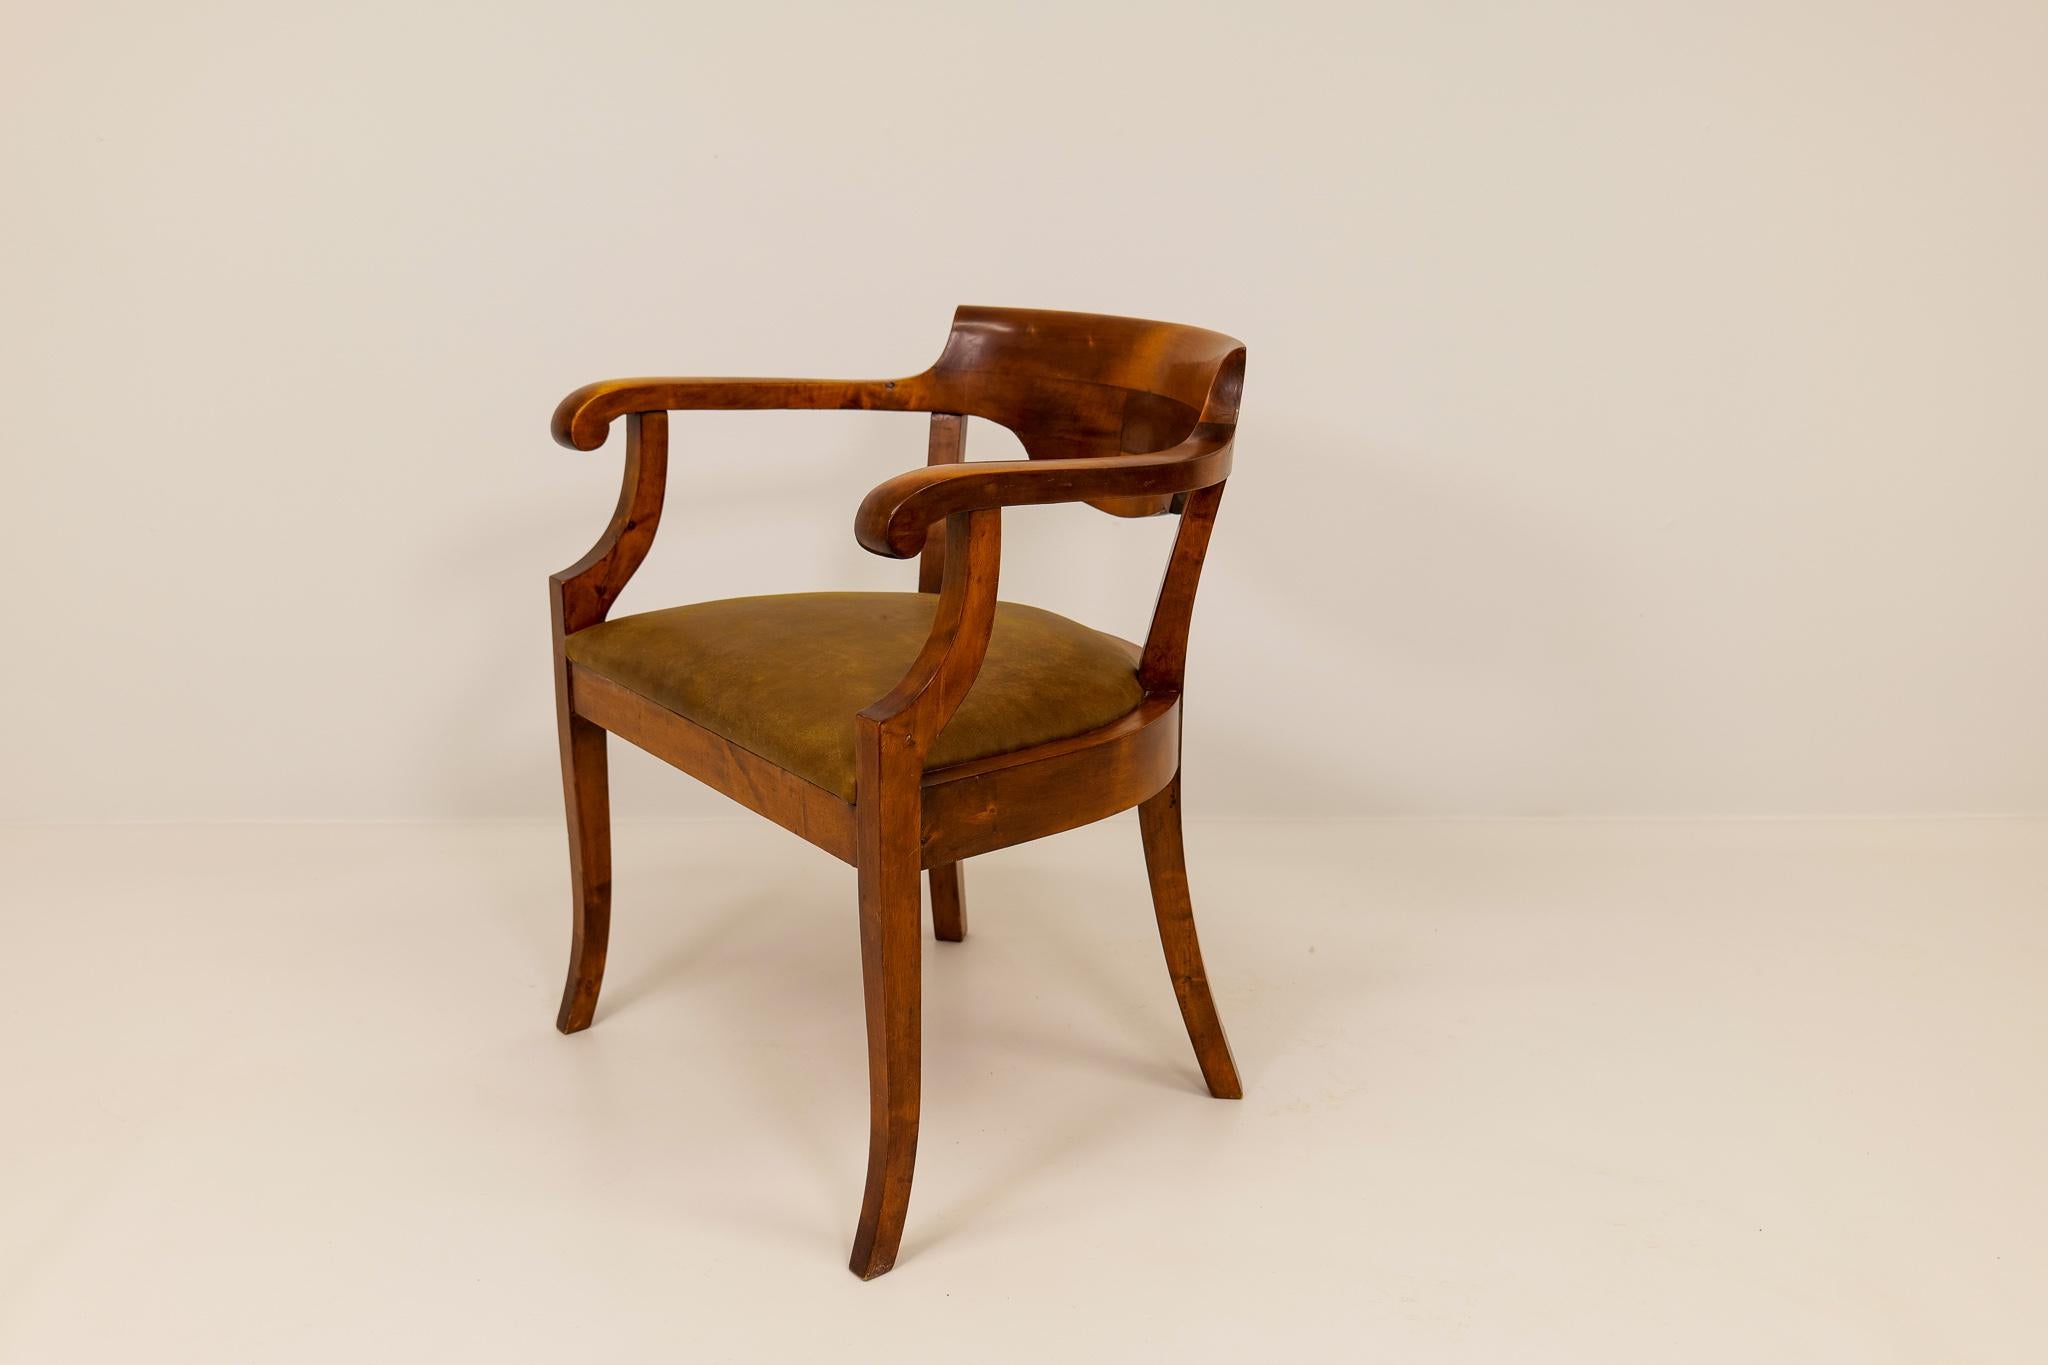 Karl Johan Swedish Desk Chair Birch Lacquered Mahogany Brown Sweden 1920s For Sale